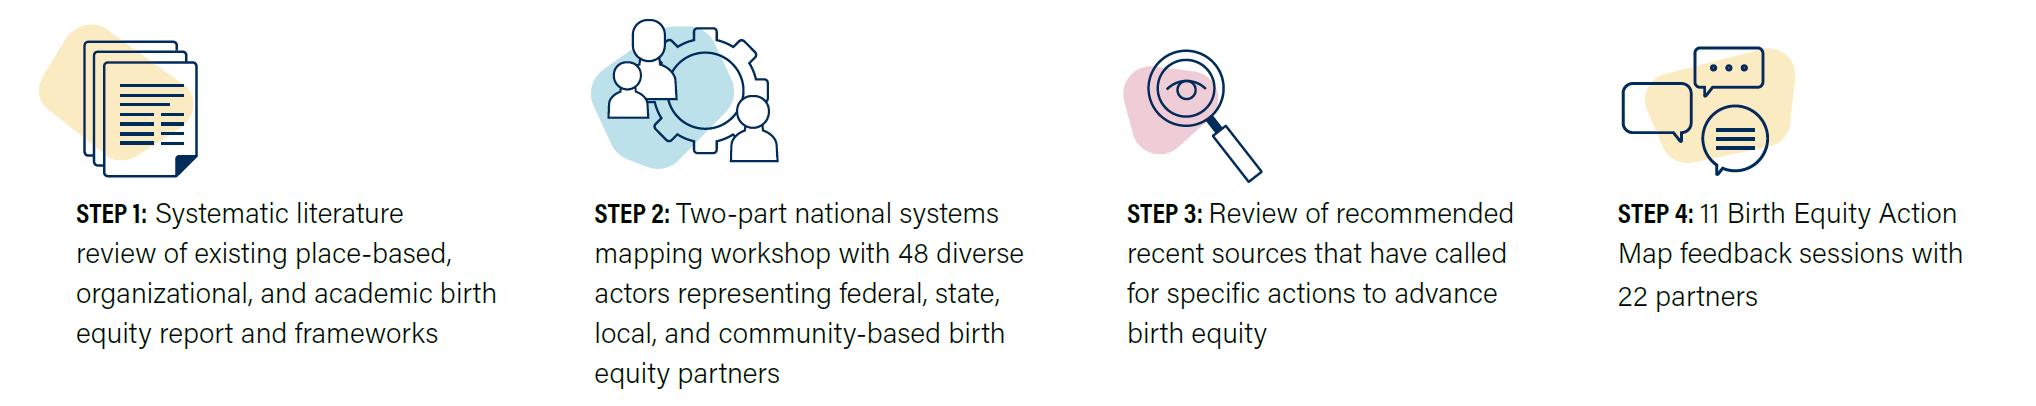 Process Overview:</p>
<p>Step 1: Systematic literature review of existing place-based, organizational, and academic birth equity report and frameworks.